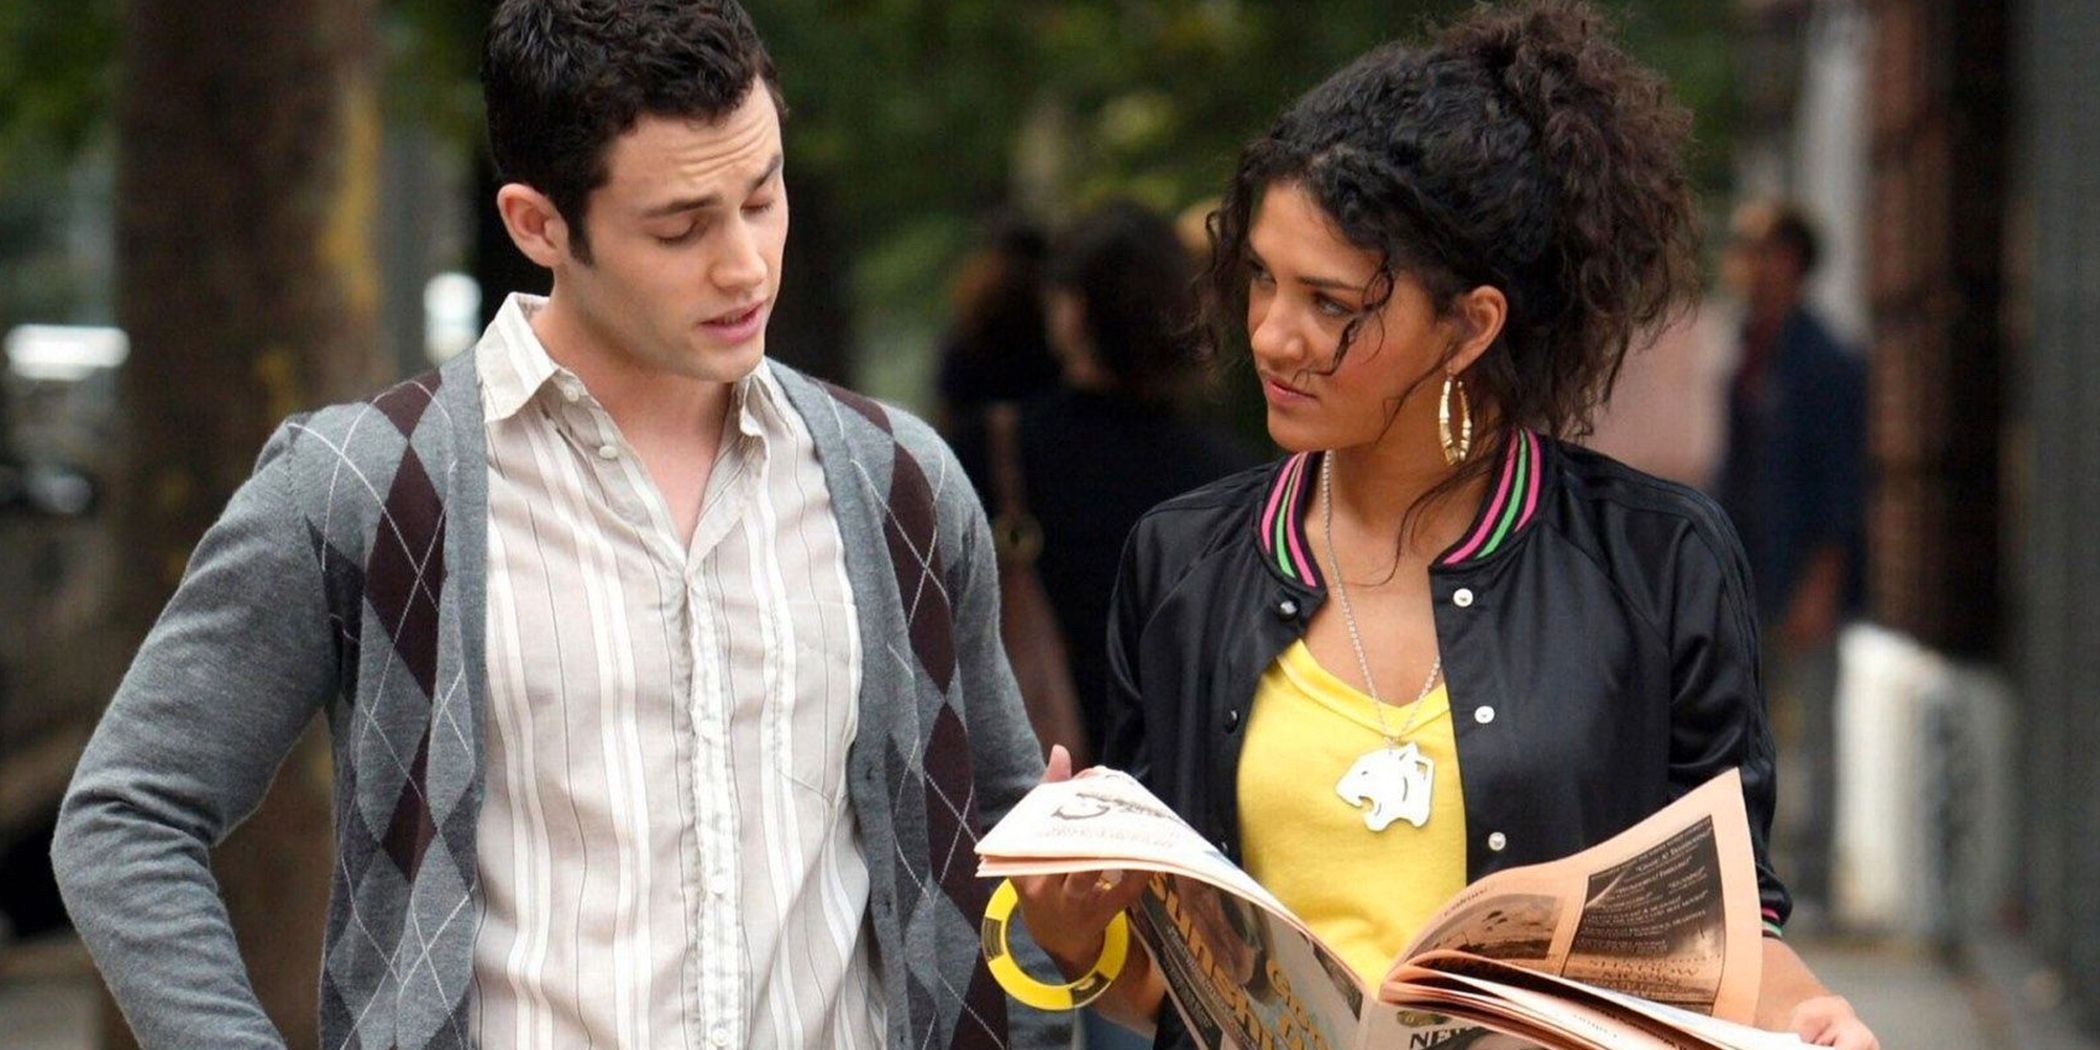 Vanessa and Dan walking together while Vanessa reads newspaper